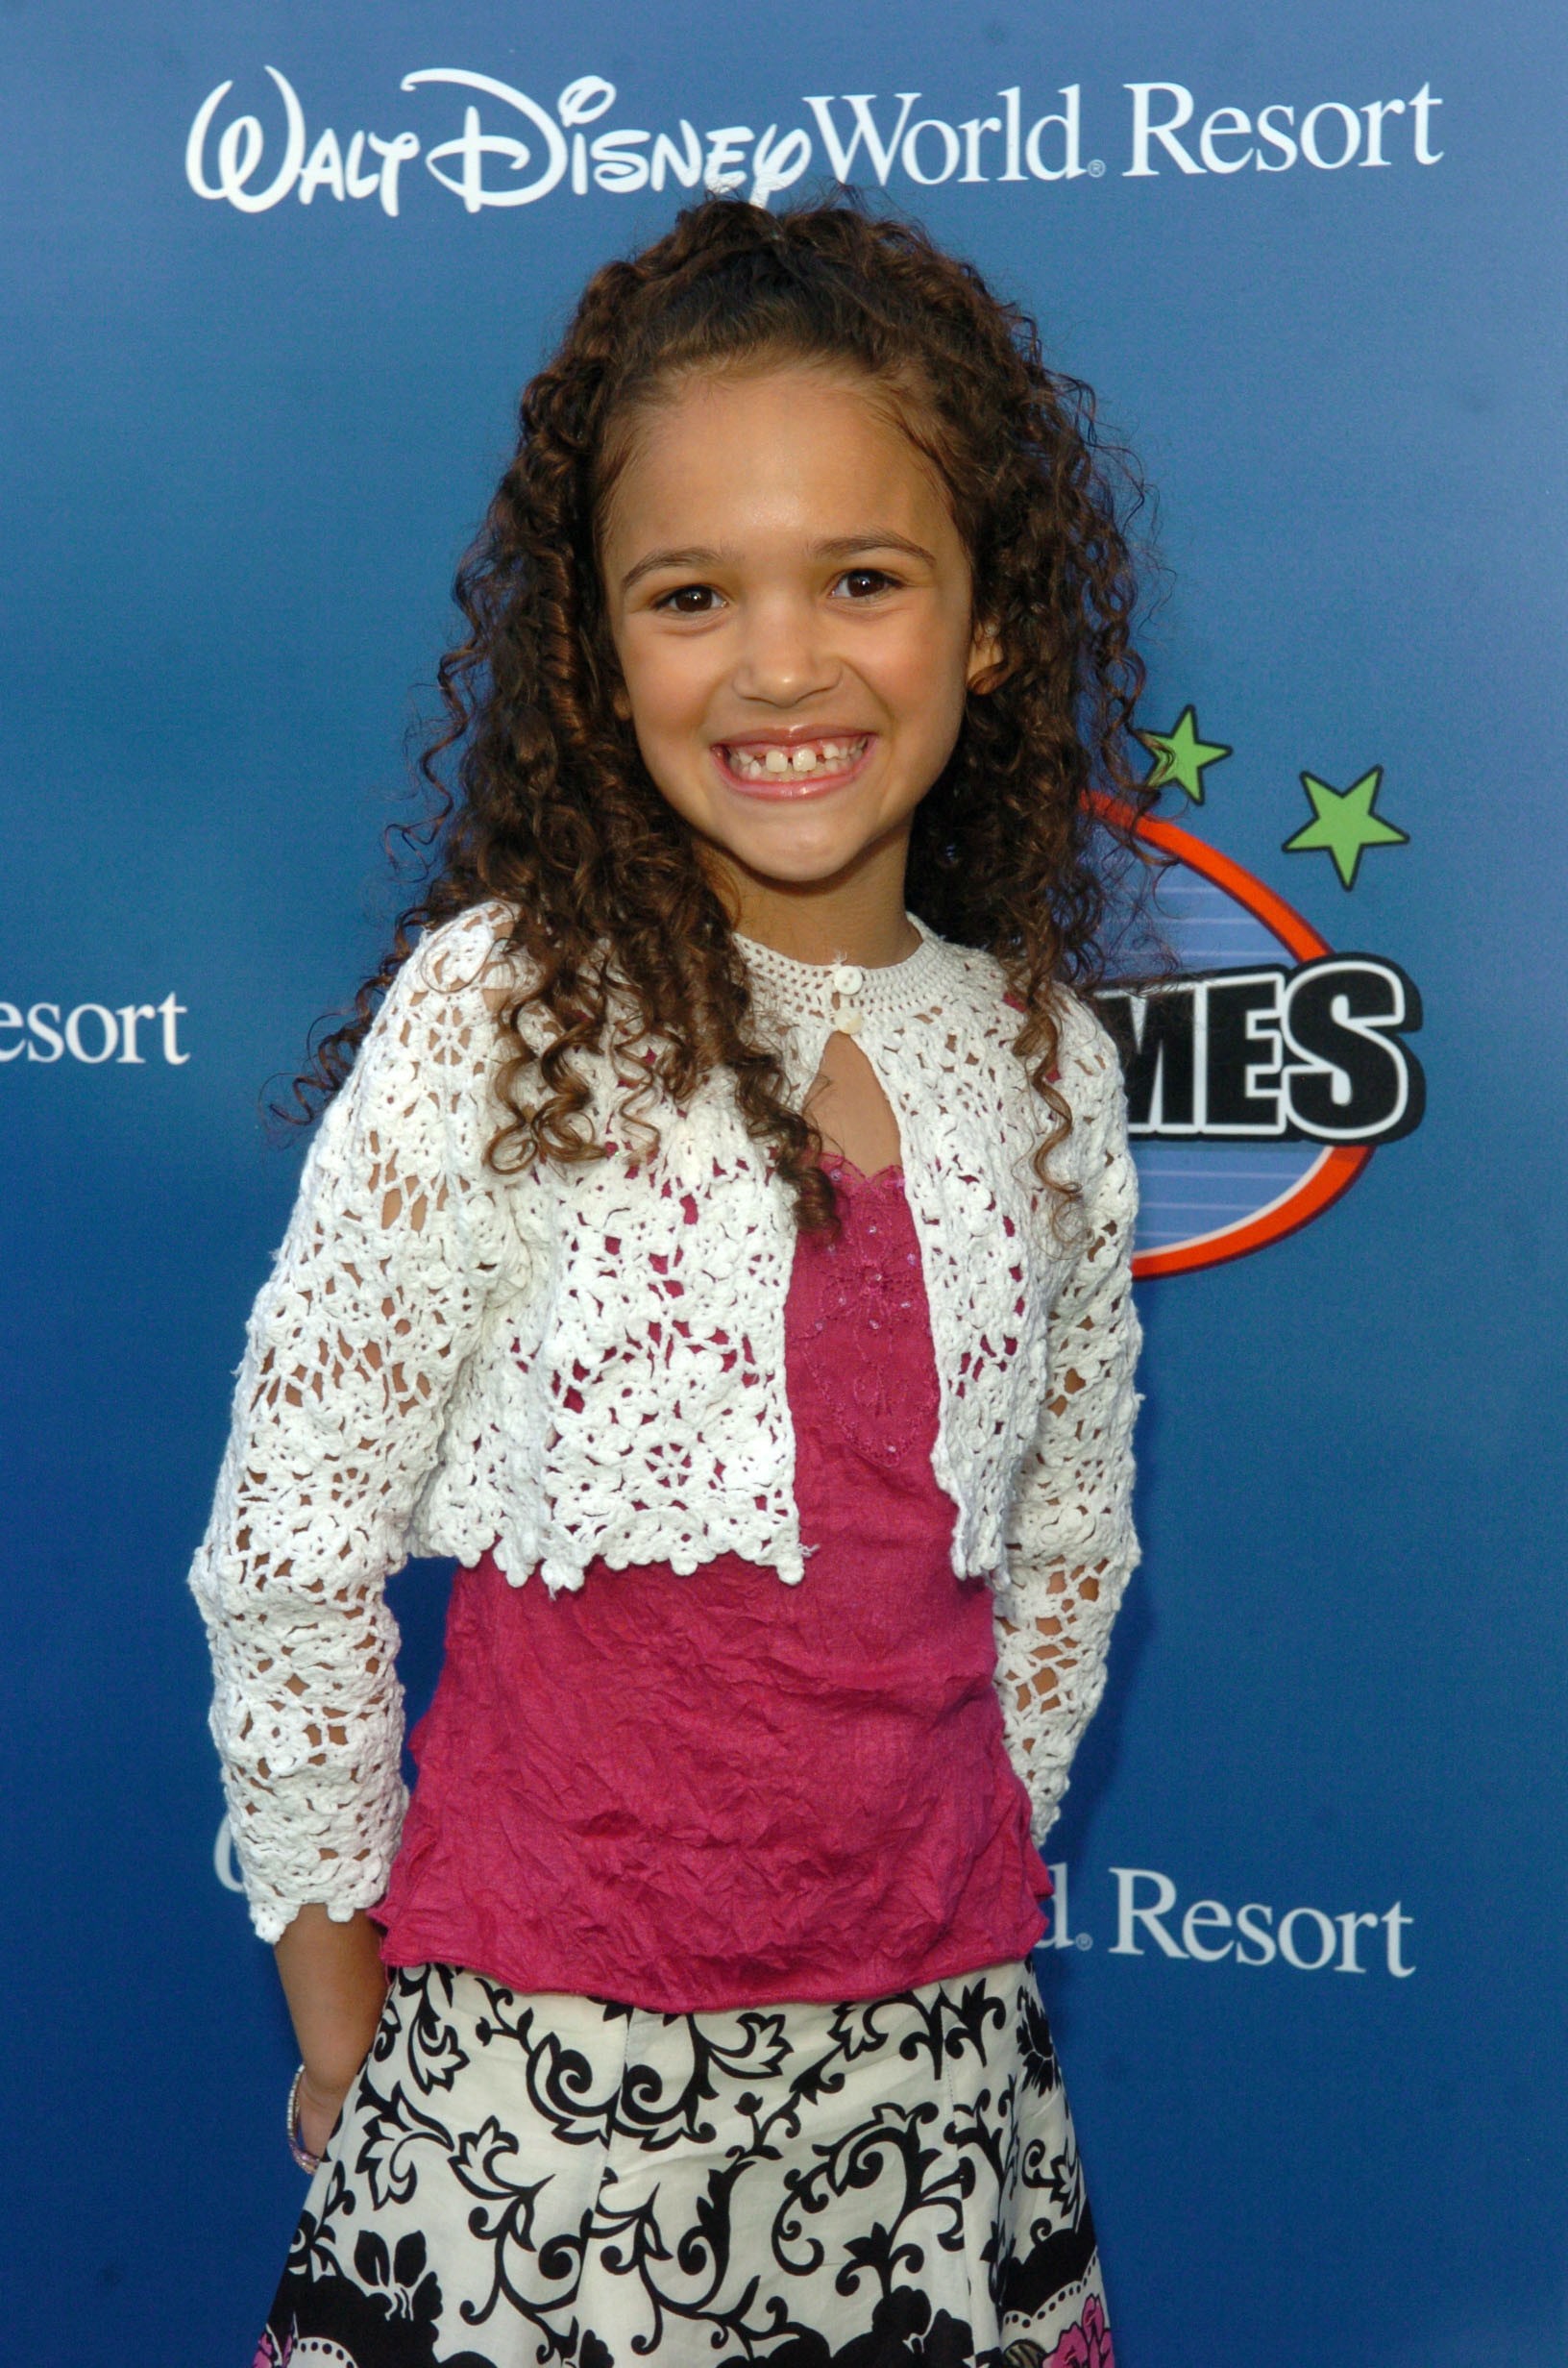 LAKE BUENA VISTA, FL - APRIL 26:  Cory in the House actress Madison Pettis for the Disney Channel attends the Disney Channel Games 2007 All-Star party at the Epcot Adventure Pavilion in Epcot Center on April 26, 2007 in Lake Buena Vista, Florida. (Photo b (Foto: Getty Images)